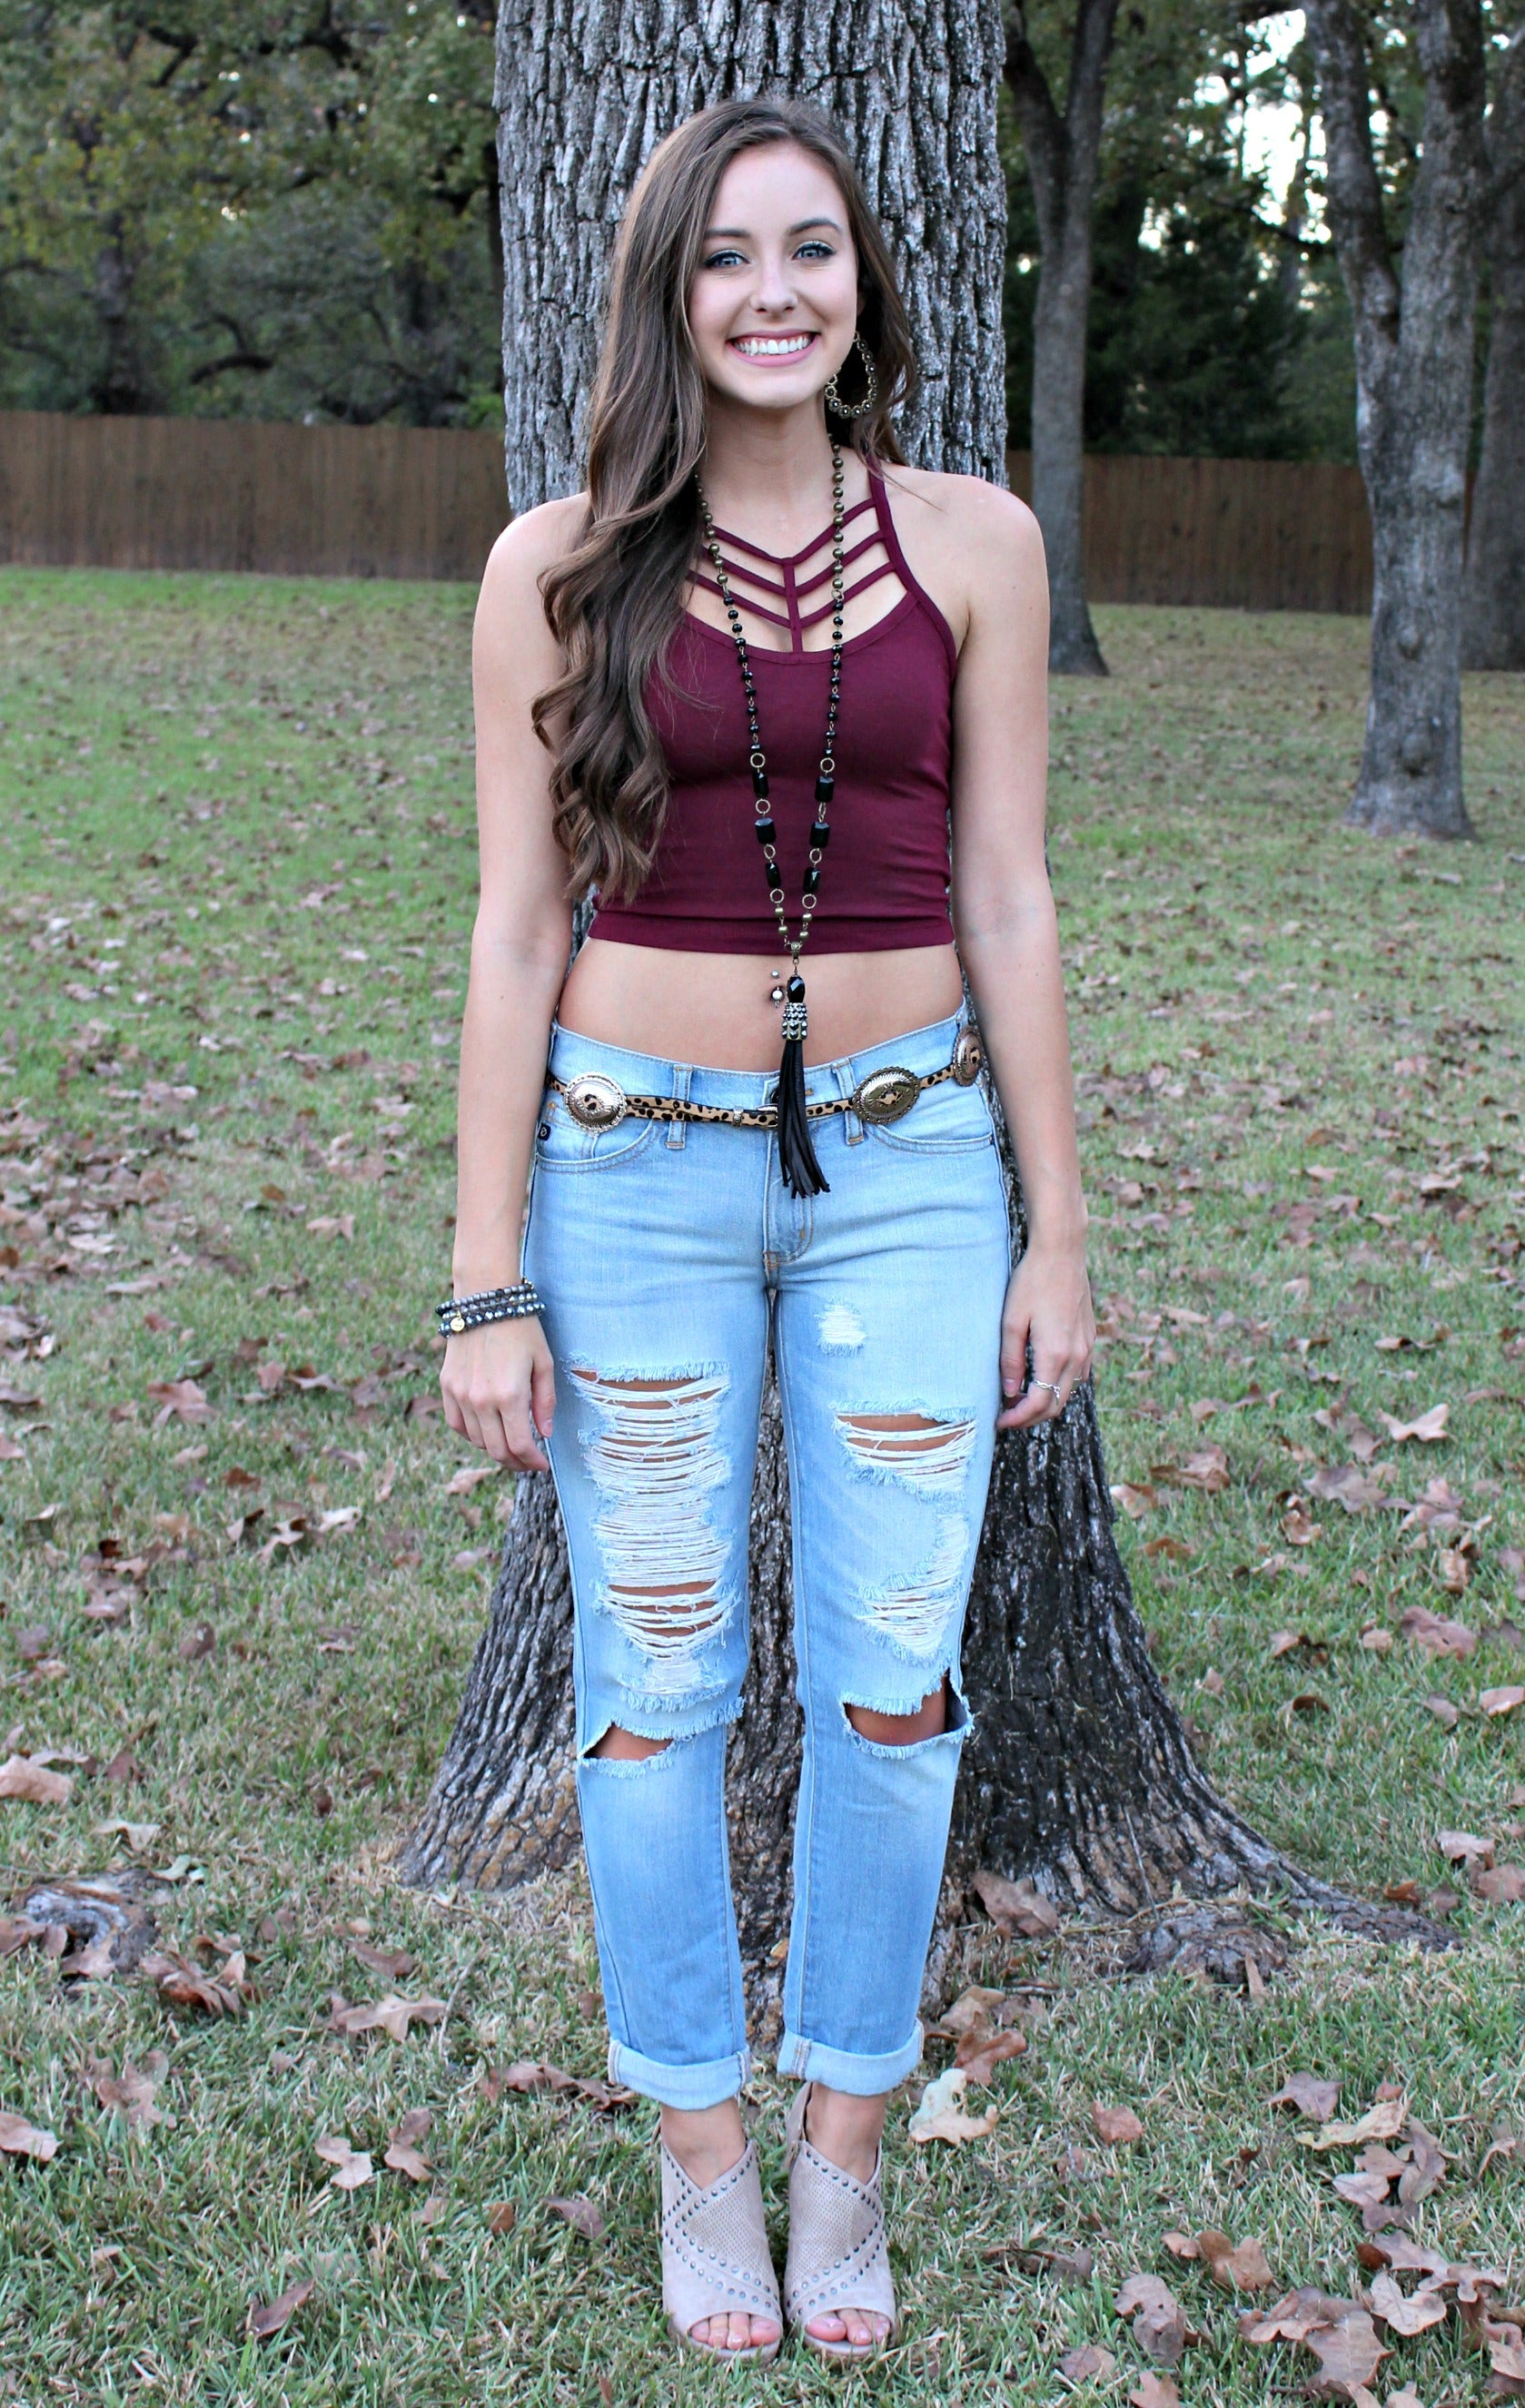 Leading Edge Caged Crop Top in Maroon - Giddy Up Glamour Boutique